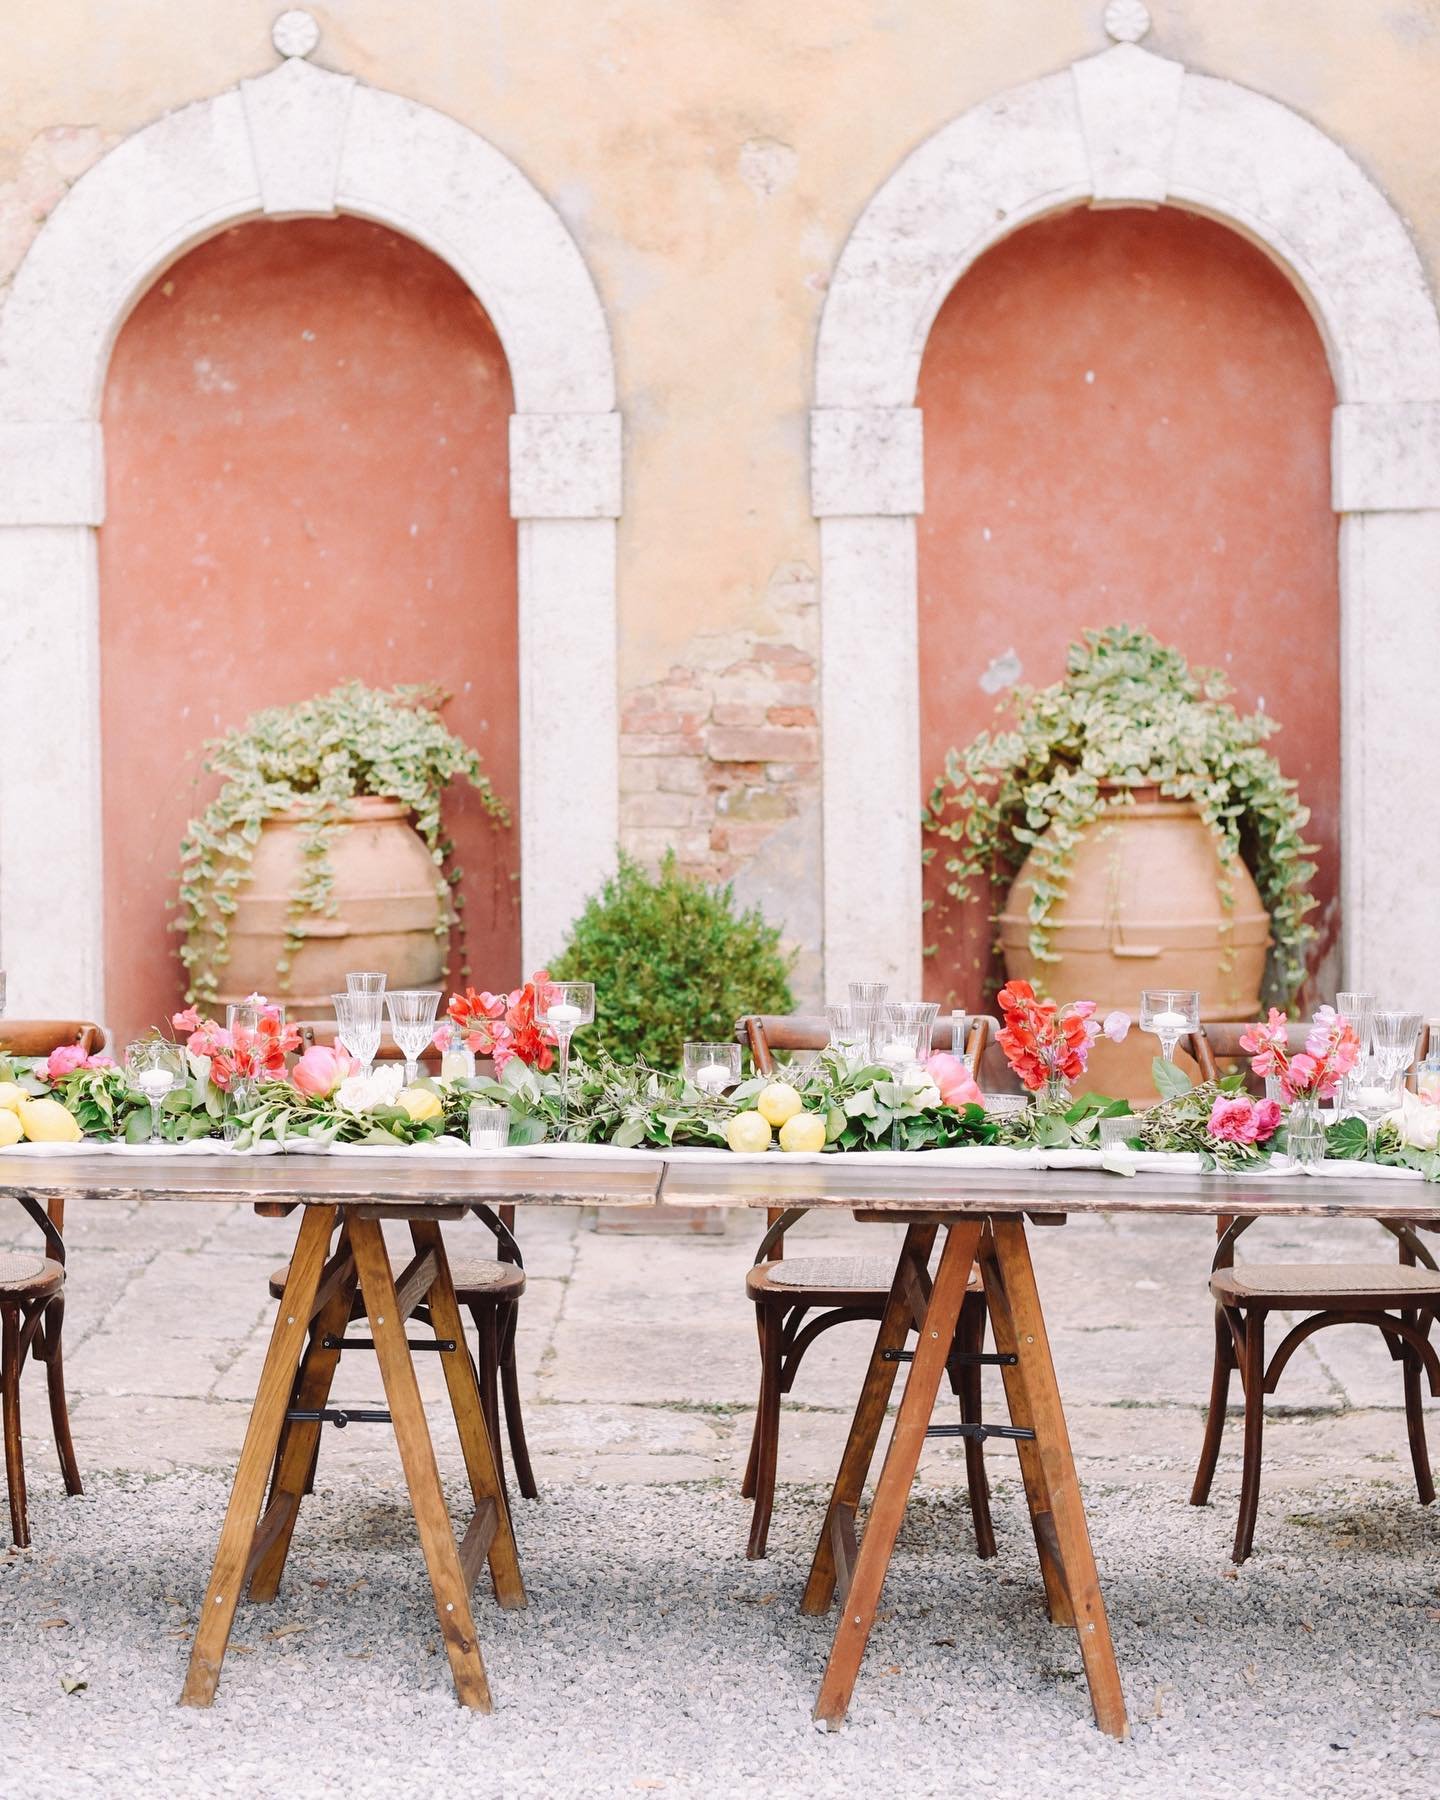 In the heart of Val d&rsquo;Orcia, Katharina and Sebastian celebrated their love in the most enchanting place. Colorful blooms, hand-painted ceramic plates in blue, little lemon-shaped placeholders and bottles of homemade limoncello welcomed their fr